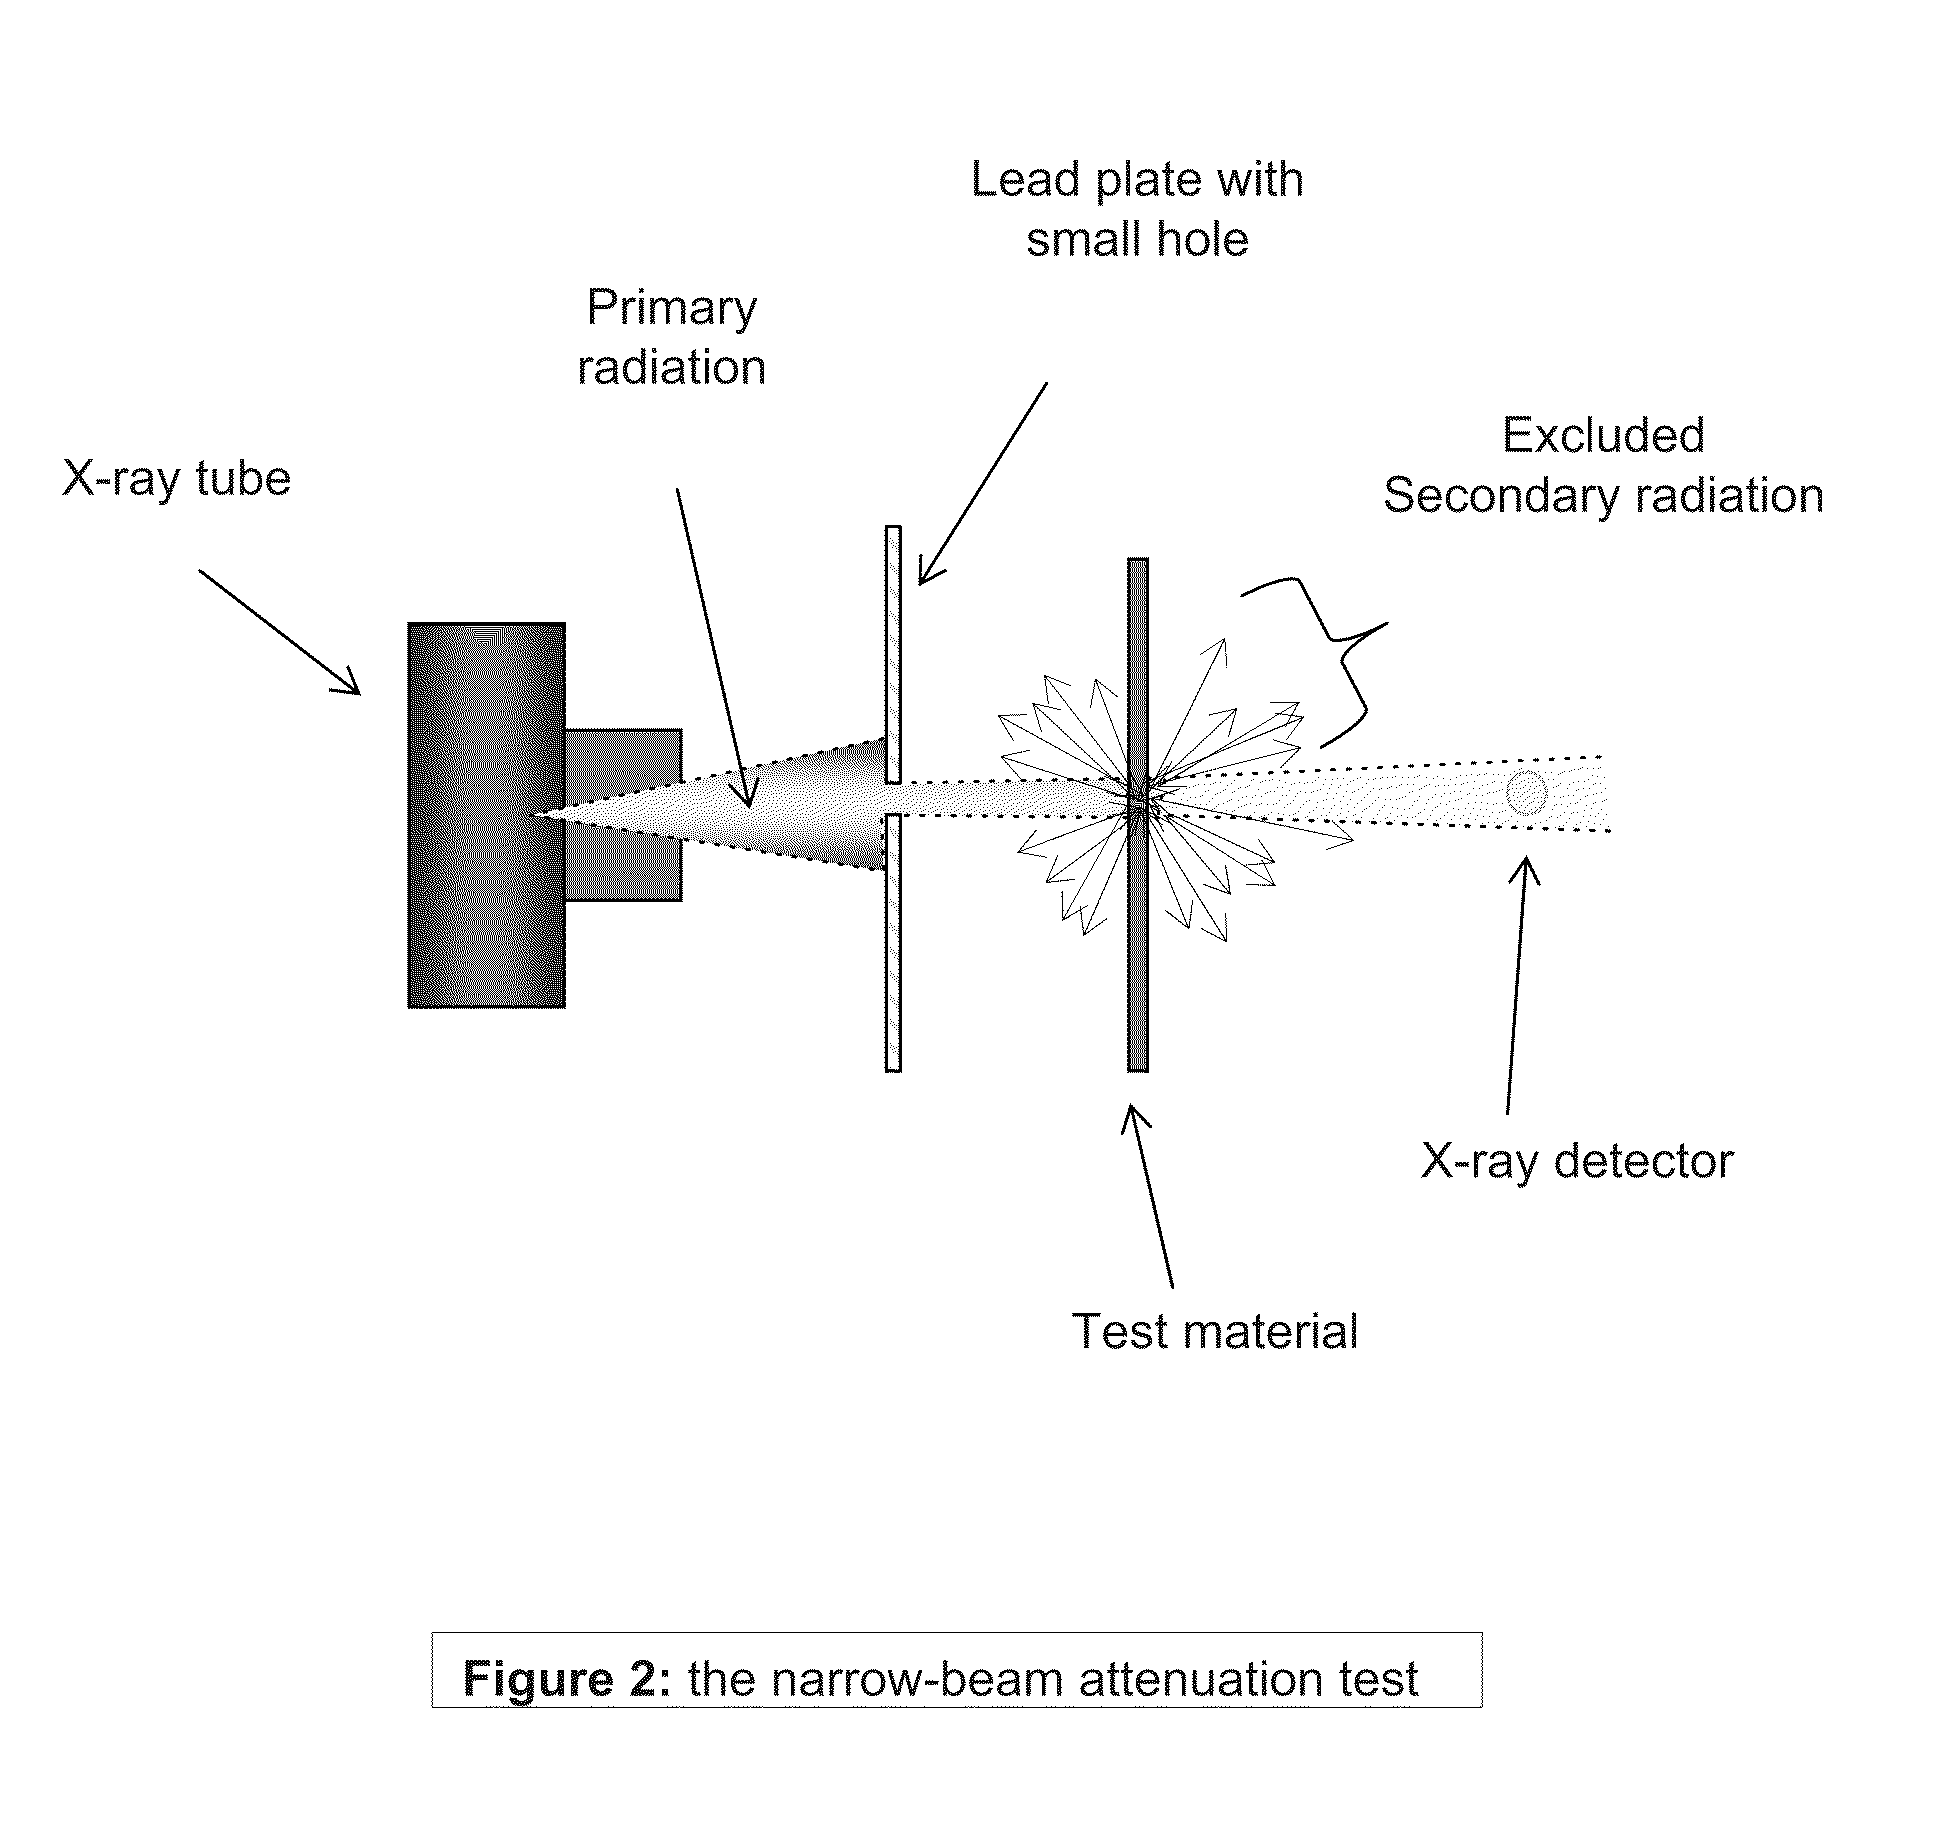 Multi-layer light-weight garment material with low radiation buildup providing scattered-radiation shielding